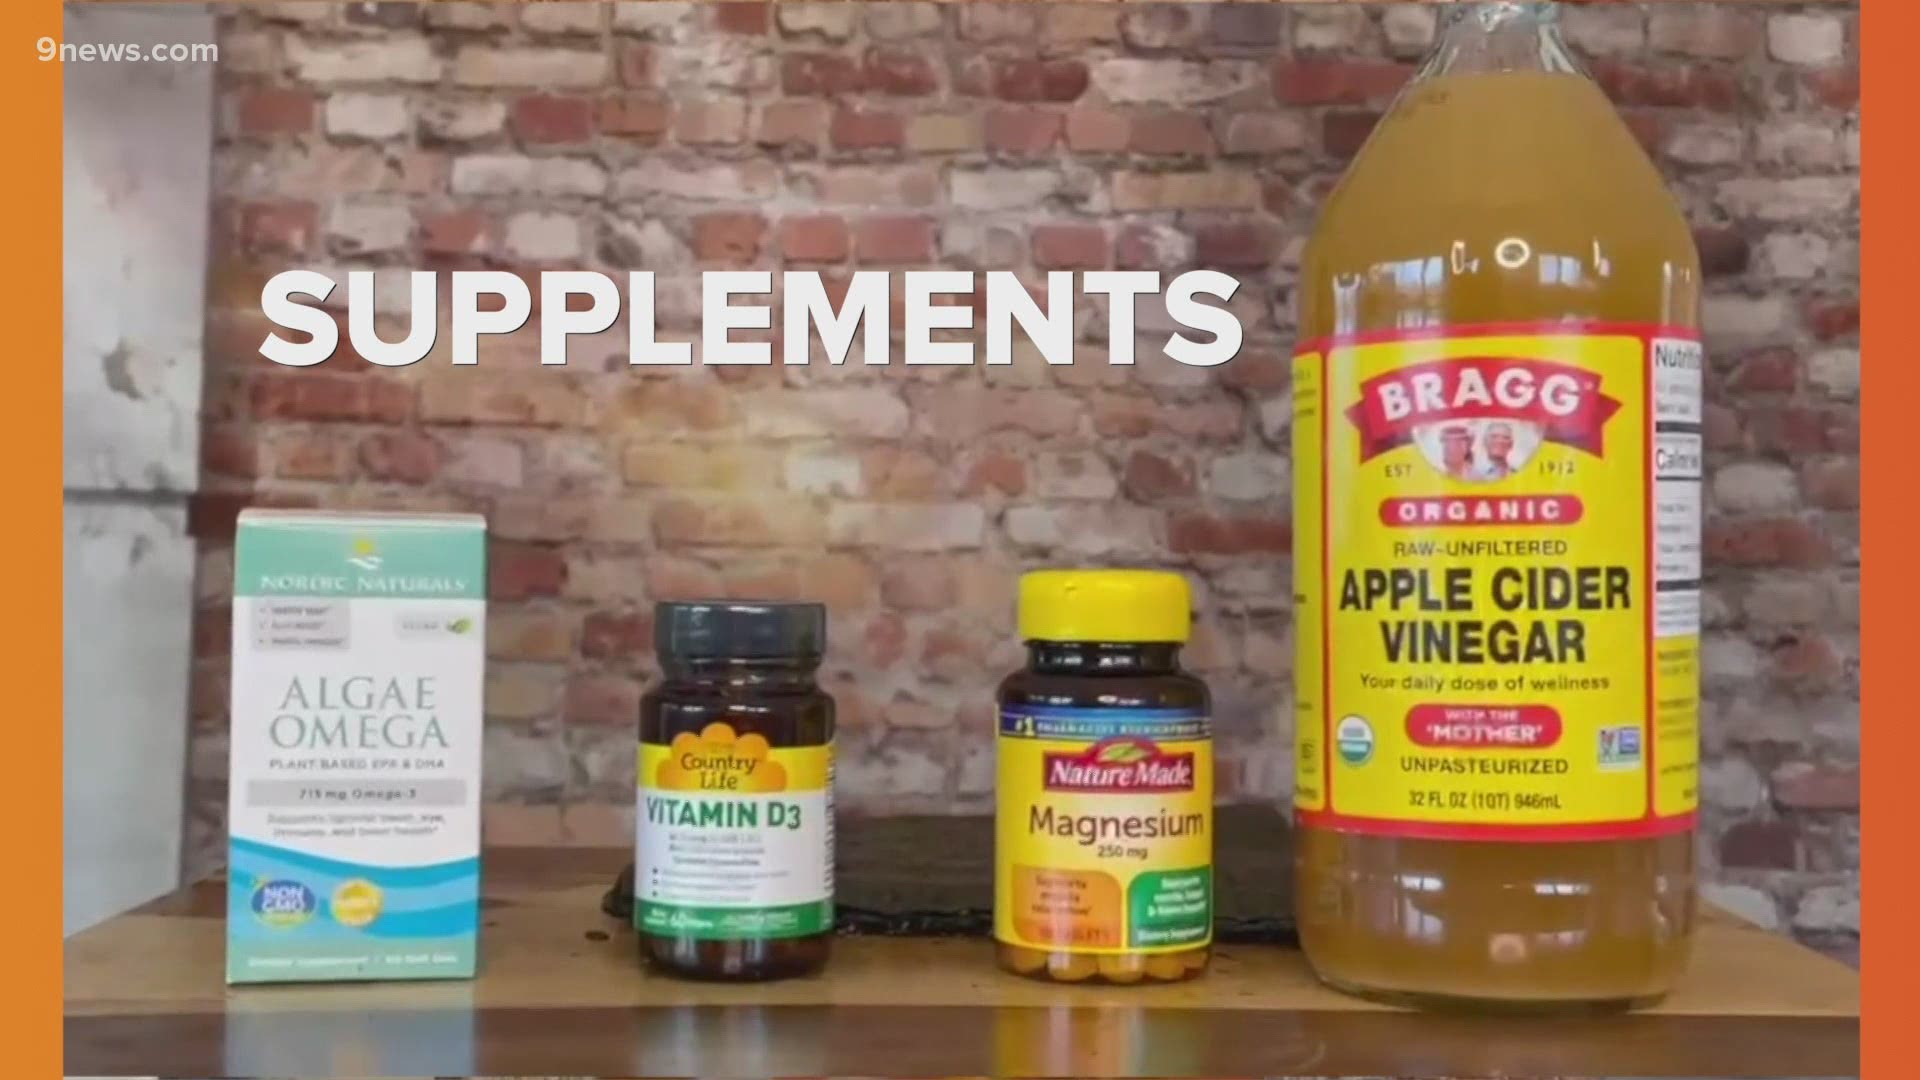 9NEWS nutrition expert Kristin Kirkpatrick says it's important to buy your supplements from a reputable retailer.